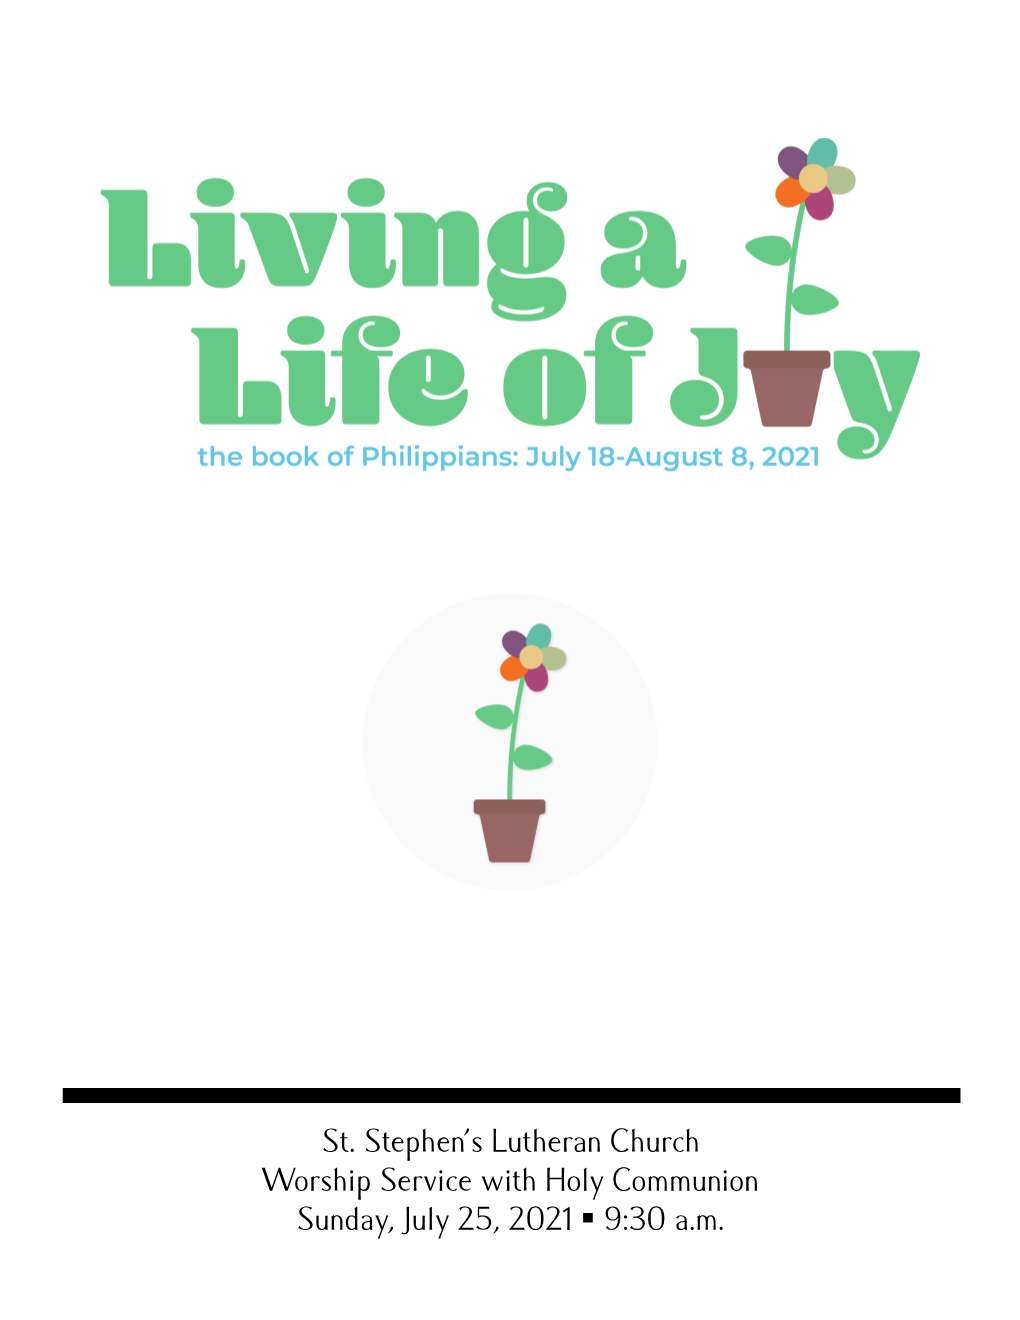 St. Stephen's Lutheran Church Worship Service with Holy